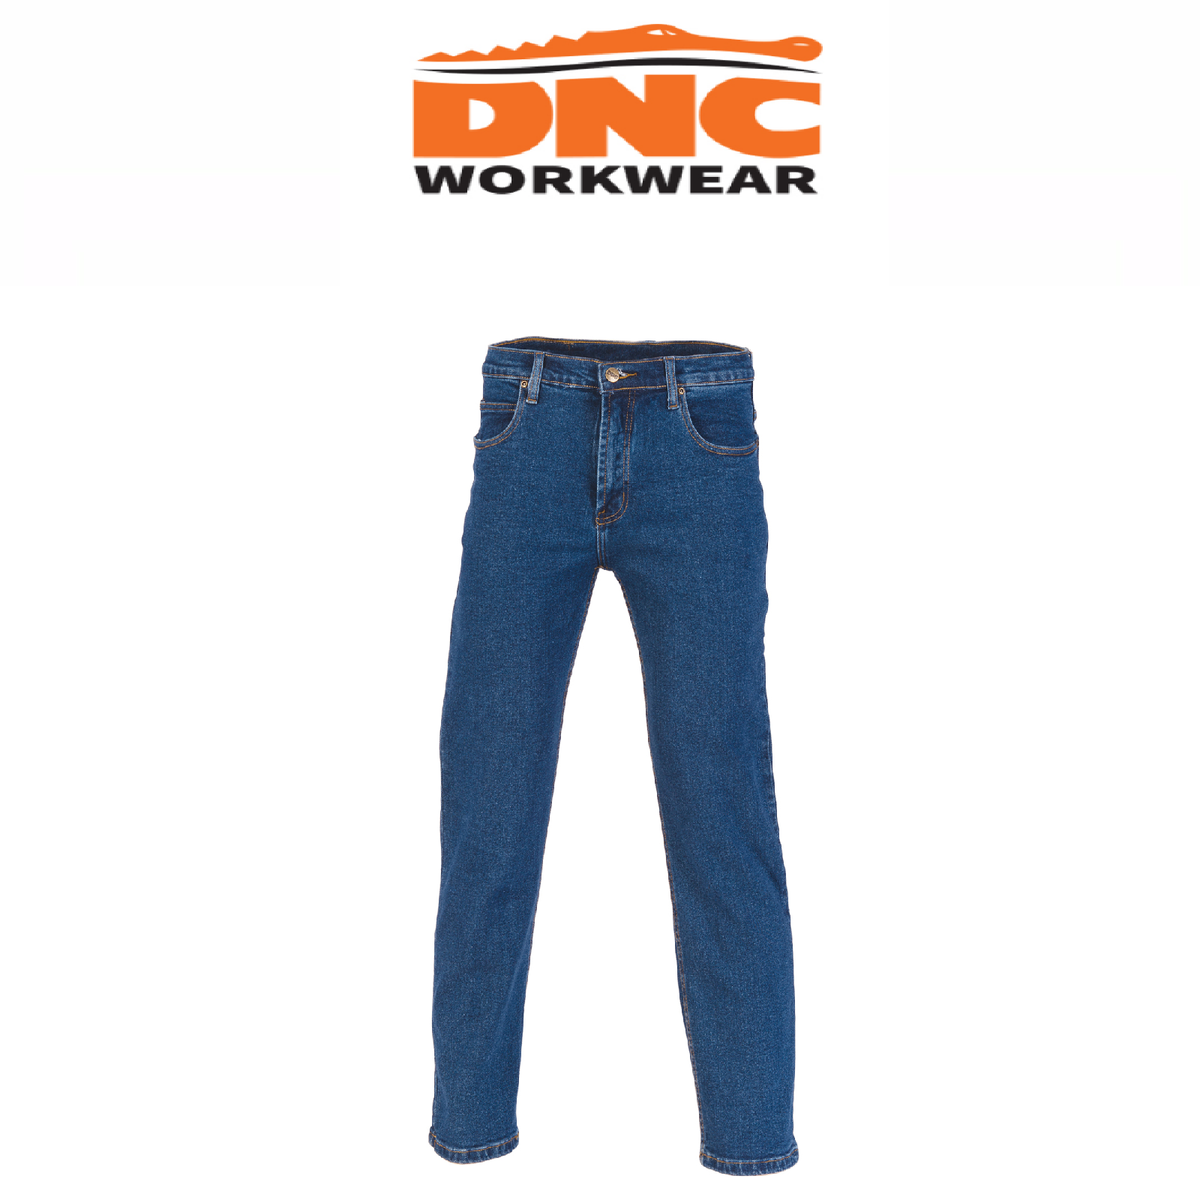 DNC Workwear Demin Stretch Jeans Comfortable Work Pant 3318